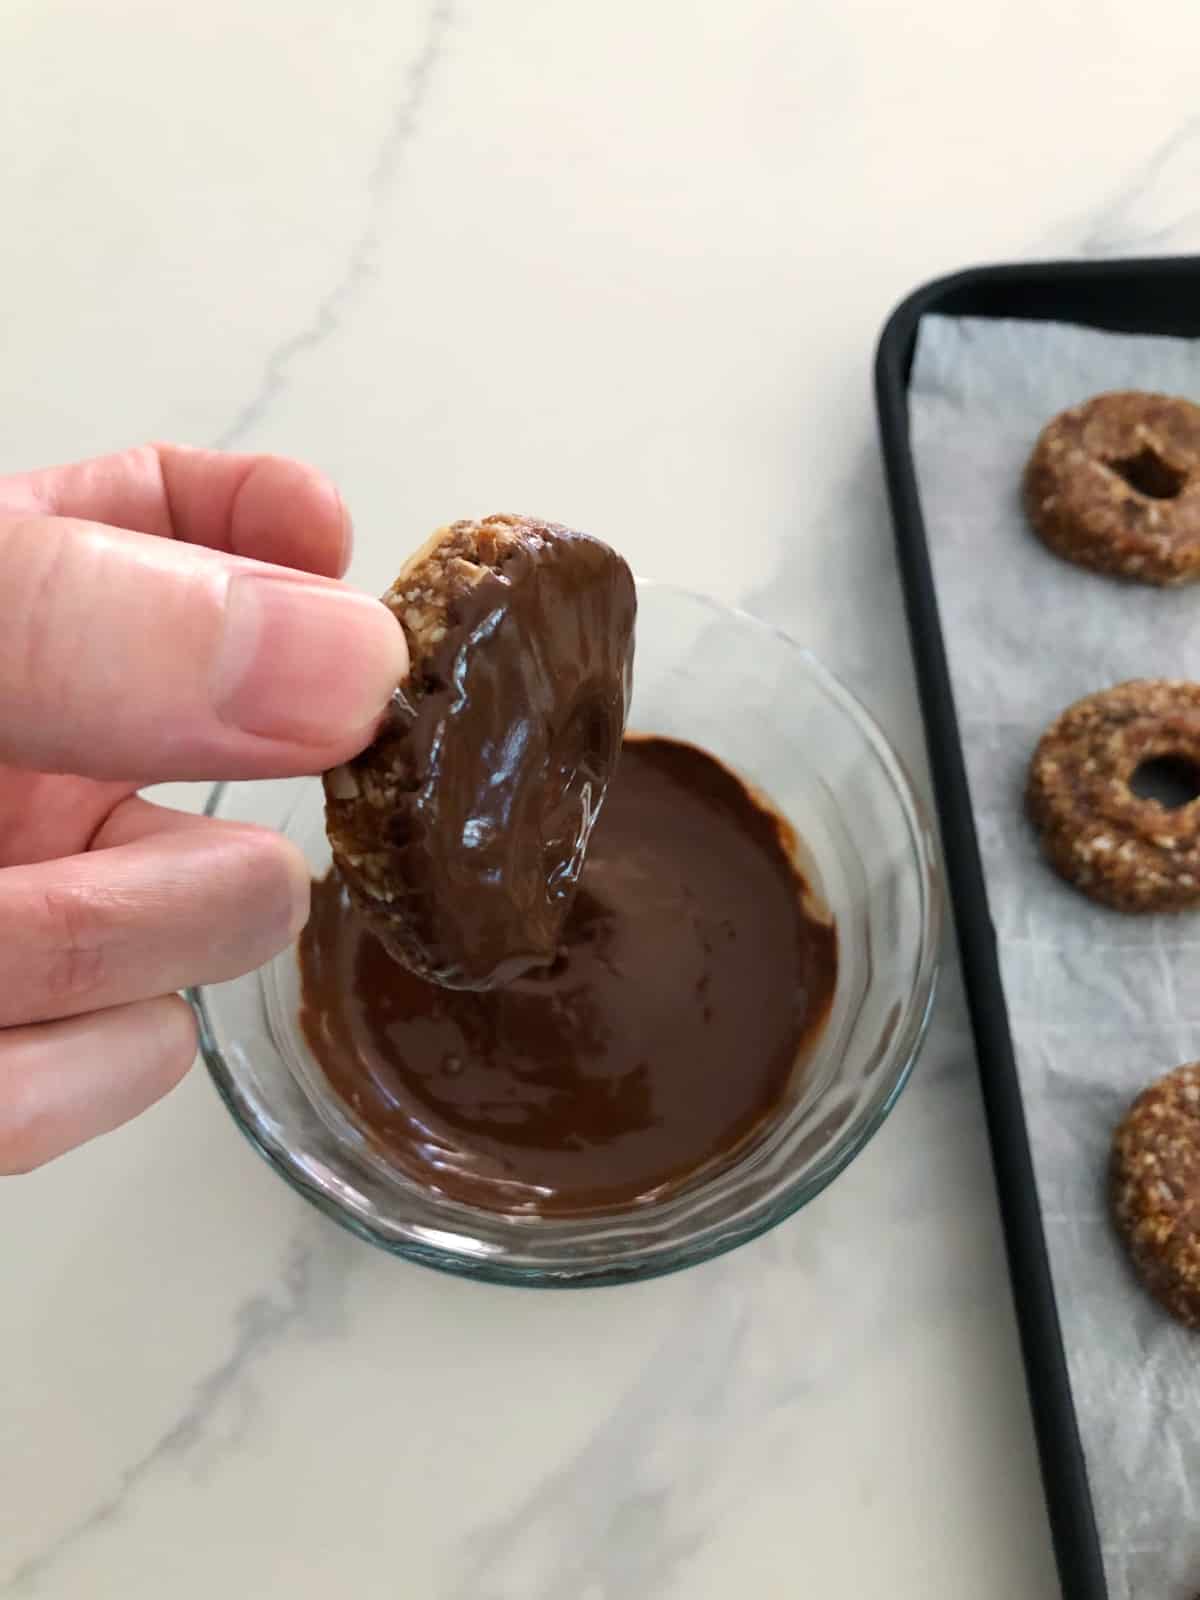 Dipping bottoms of Samoas cookies in melted chocolate.